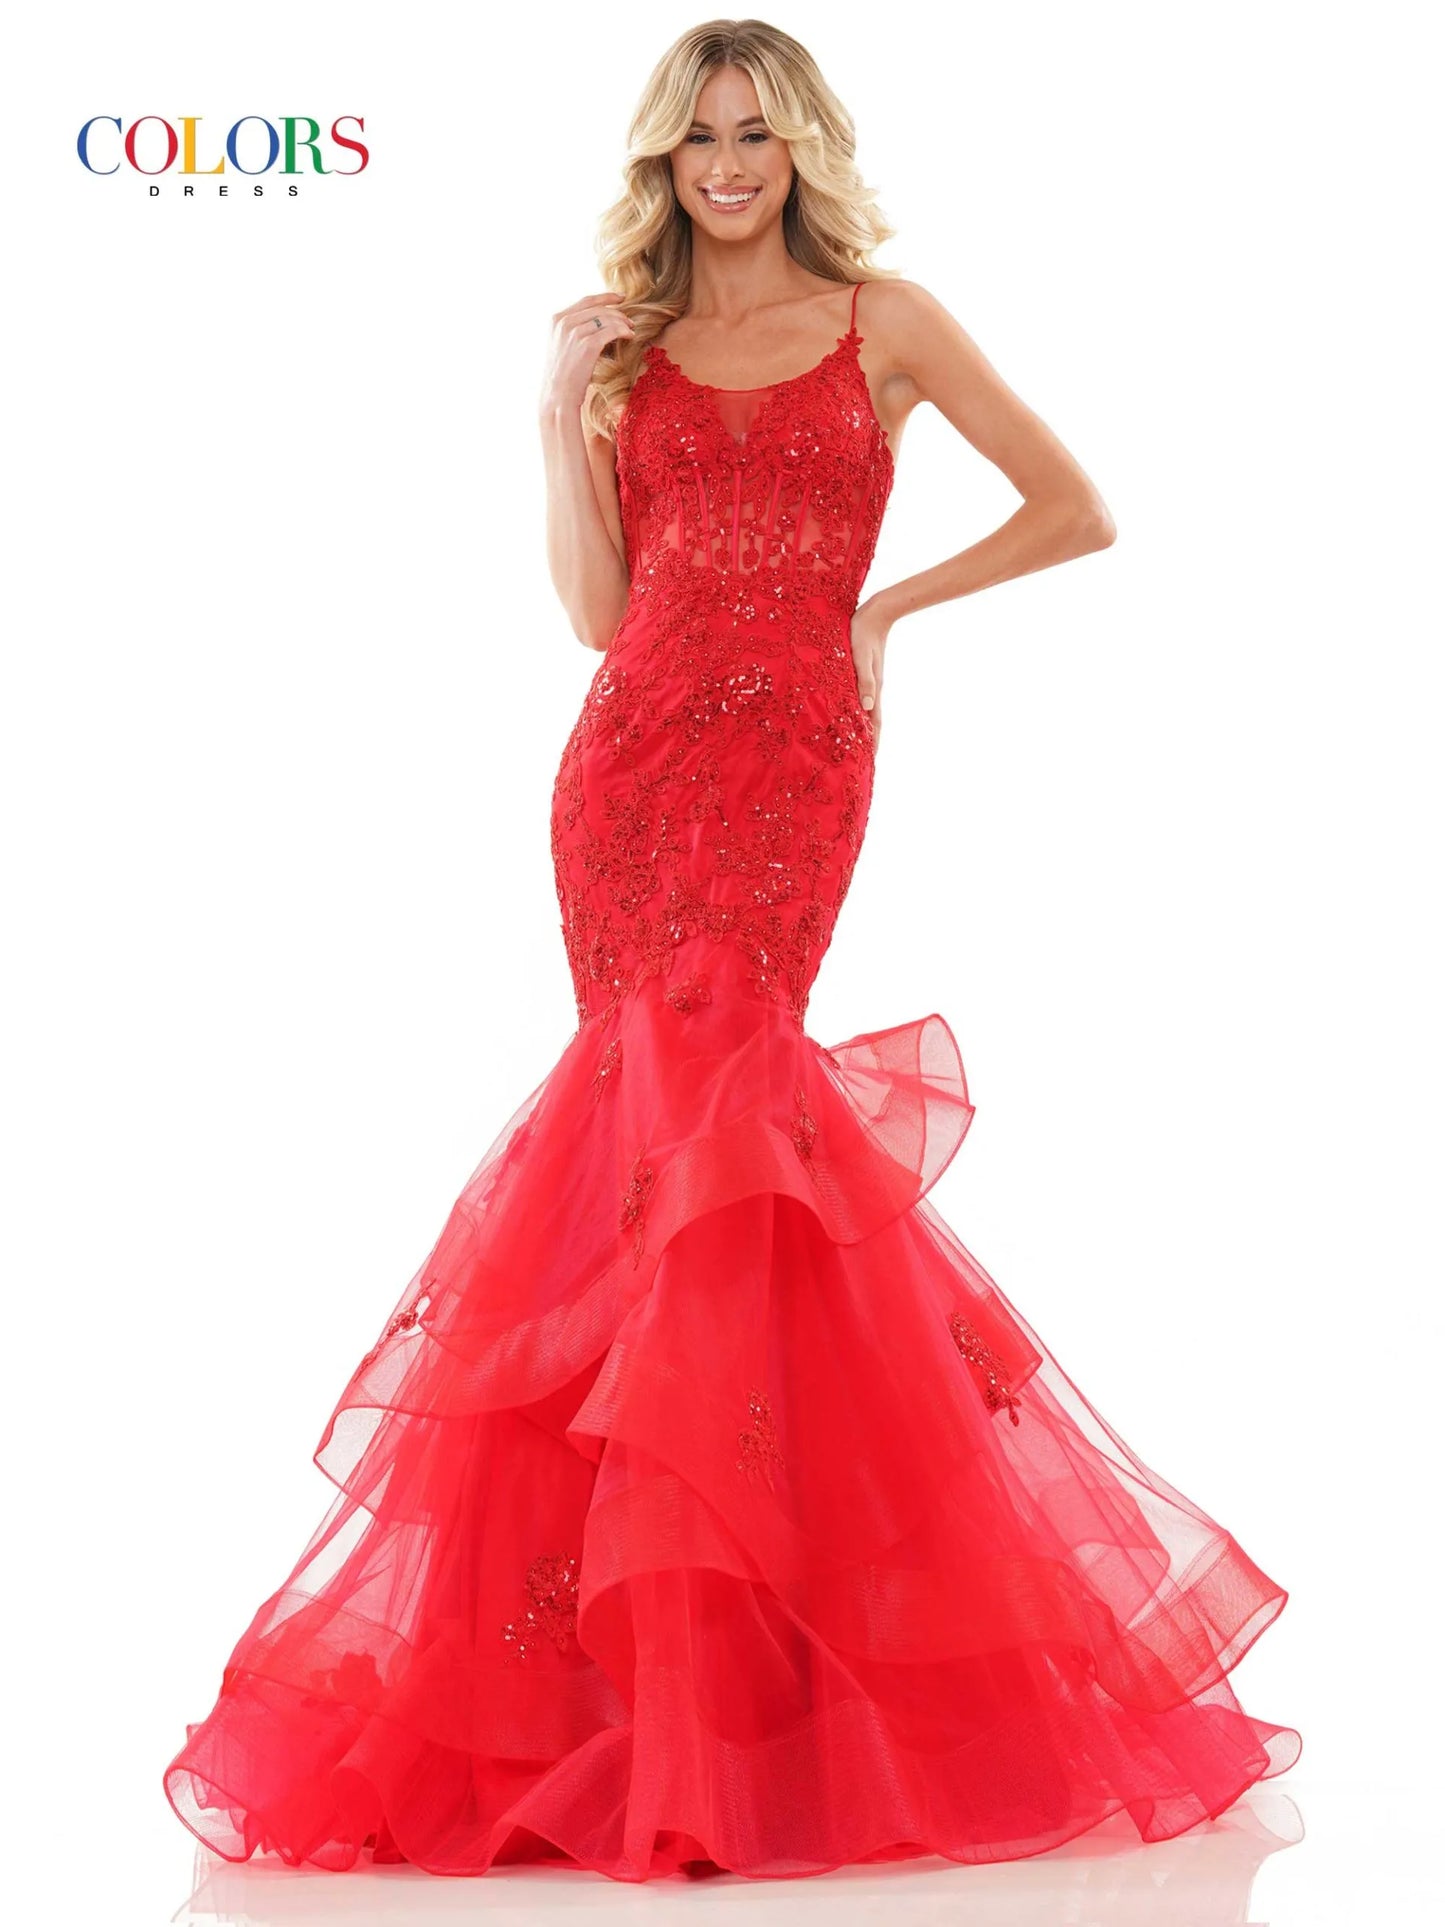 This Colors Dress 2899 Long Prom Dress is designed to flatter your figure with its fitted corset and lace applique details. The layered tulle adds a touch of elegance, perfect for formal events or pageants. Feel confident and beautiful in this stunning gown.